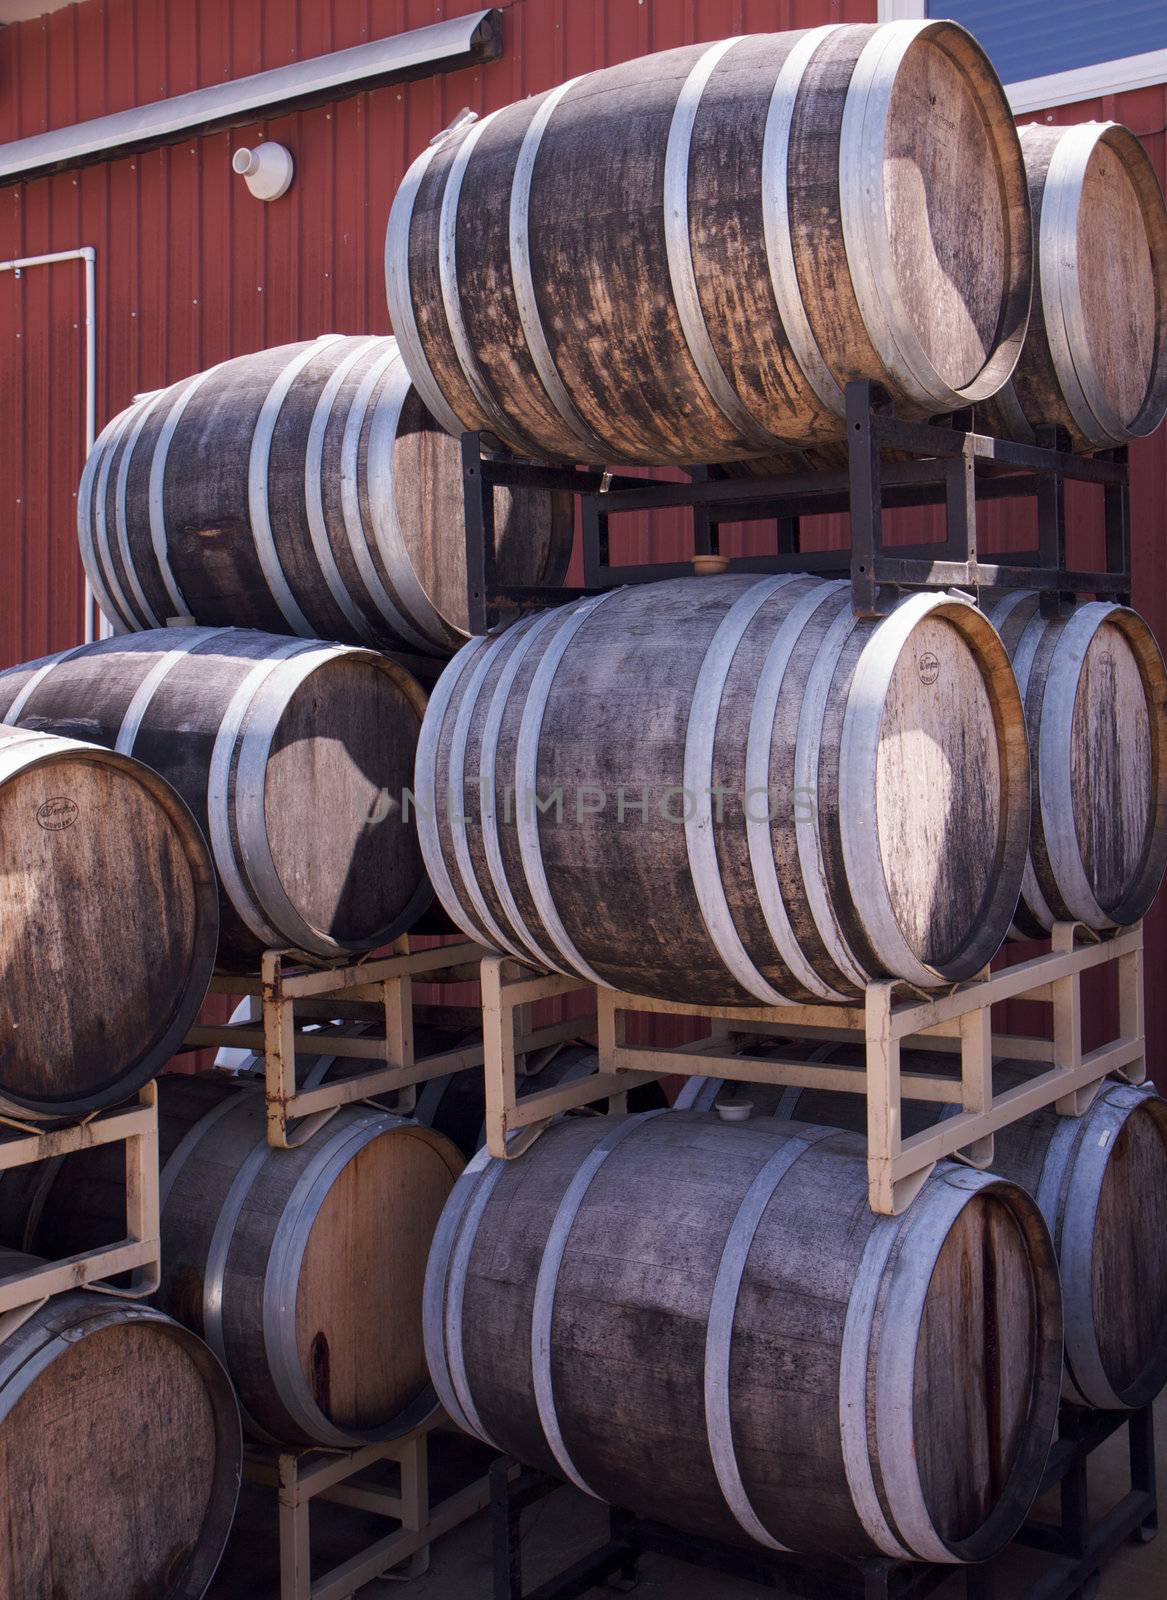 Stacks of wooden wine barrels against winery warehouse